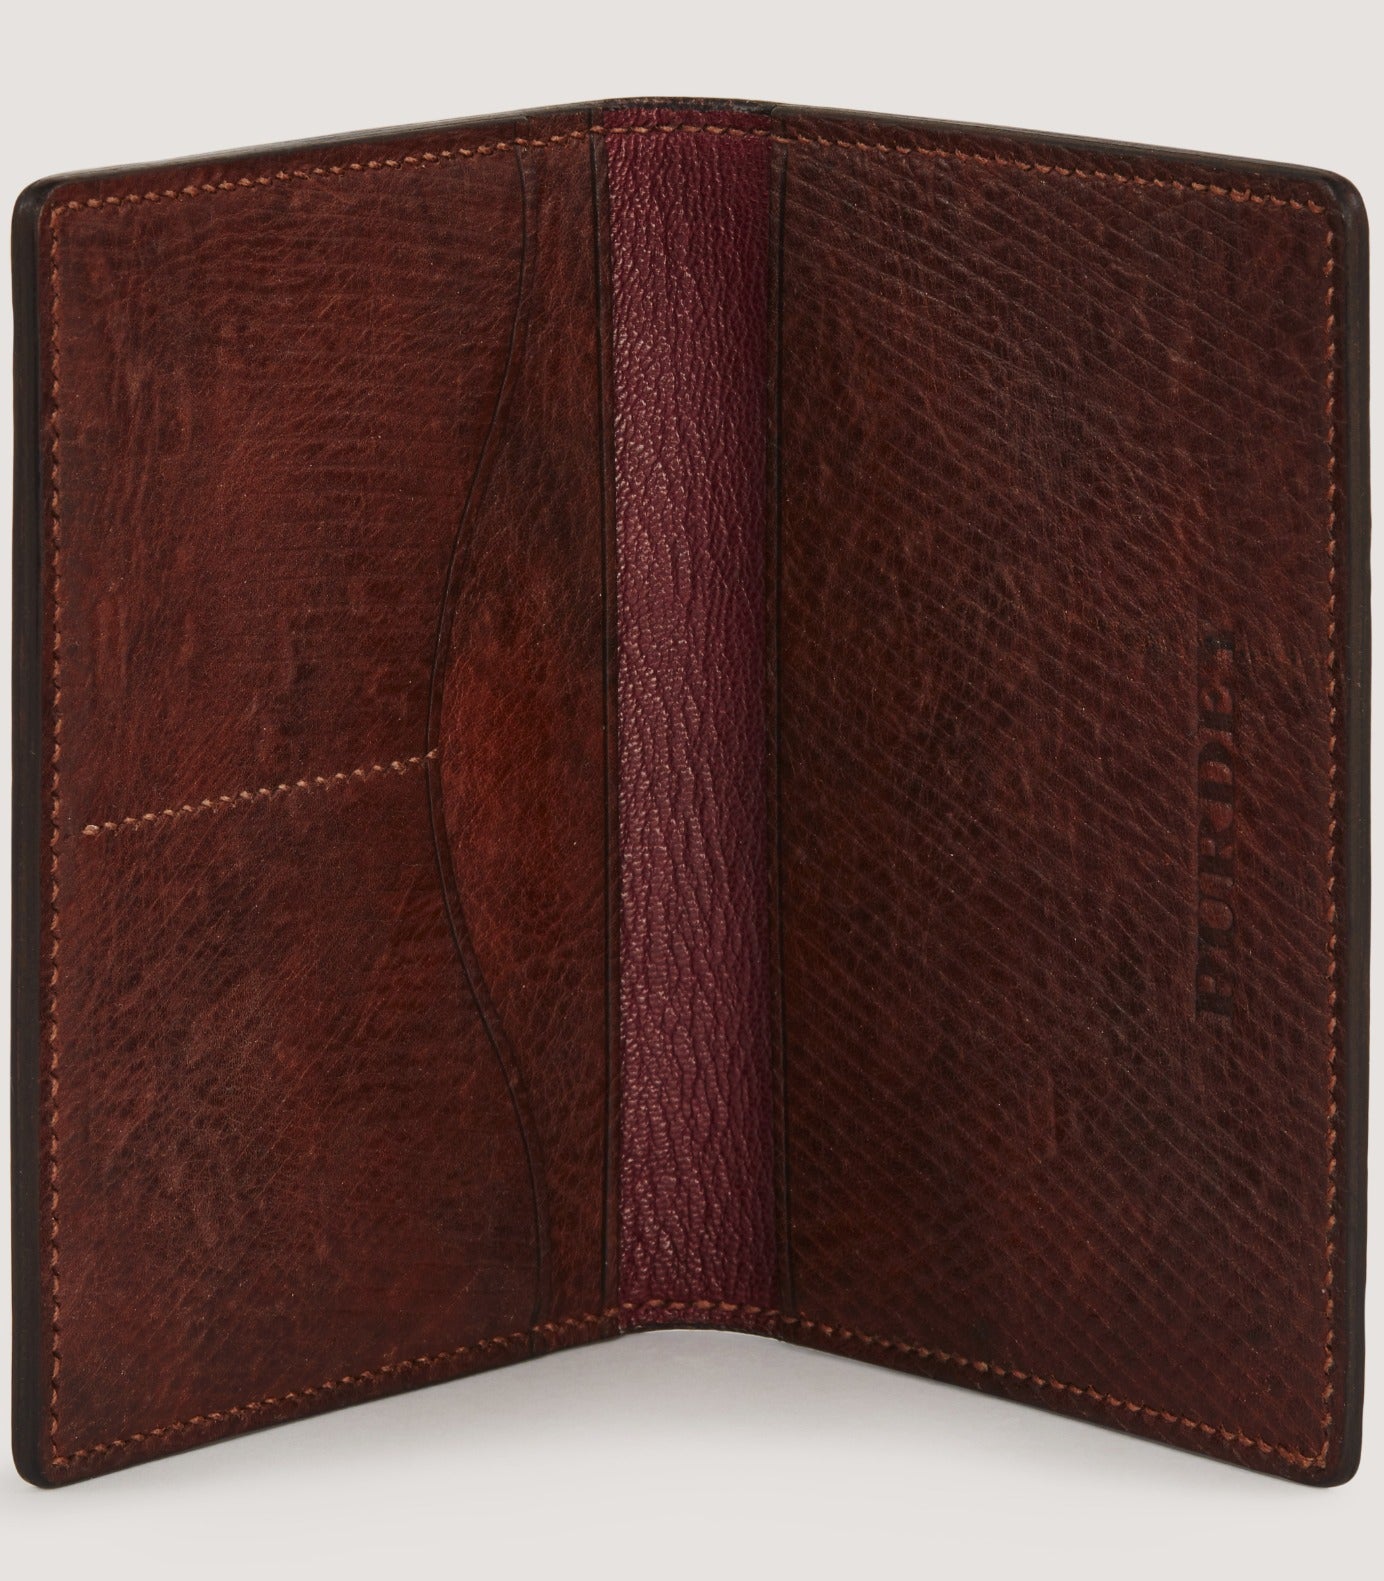 Russia Leather Passport Holder In Brown